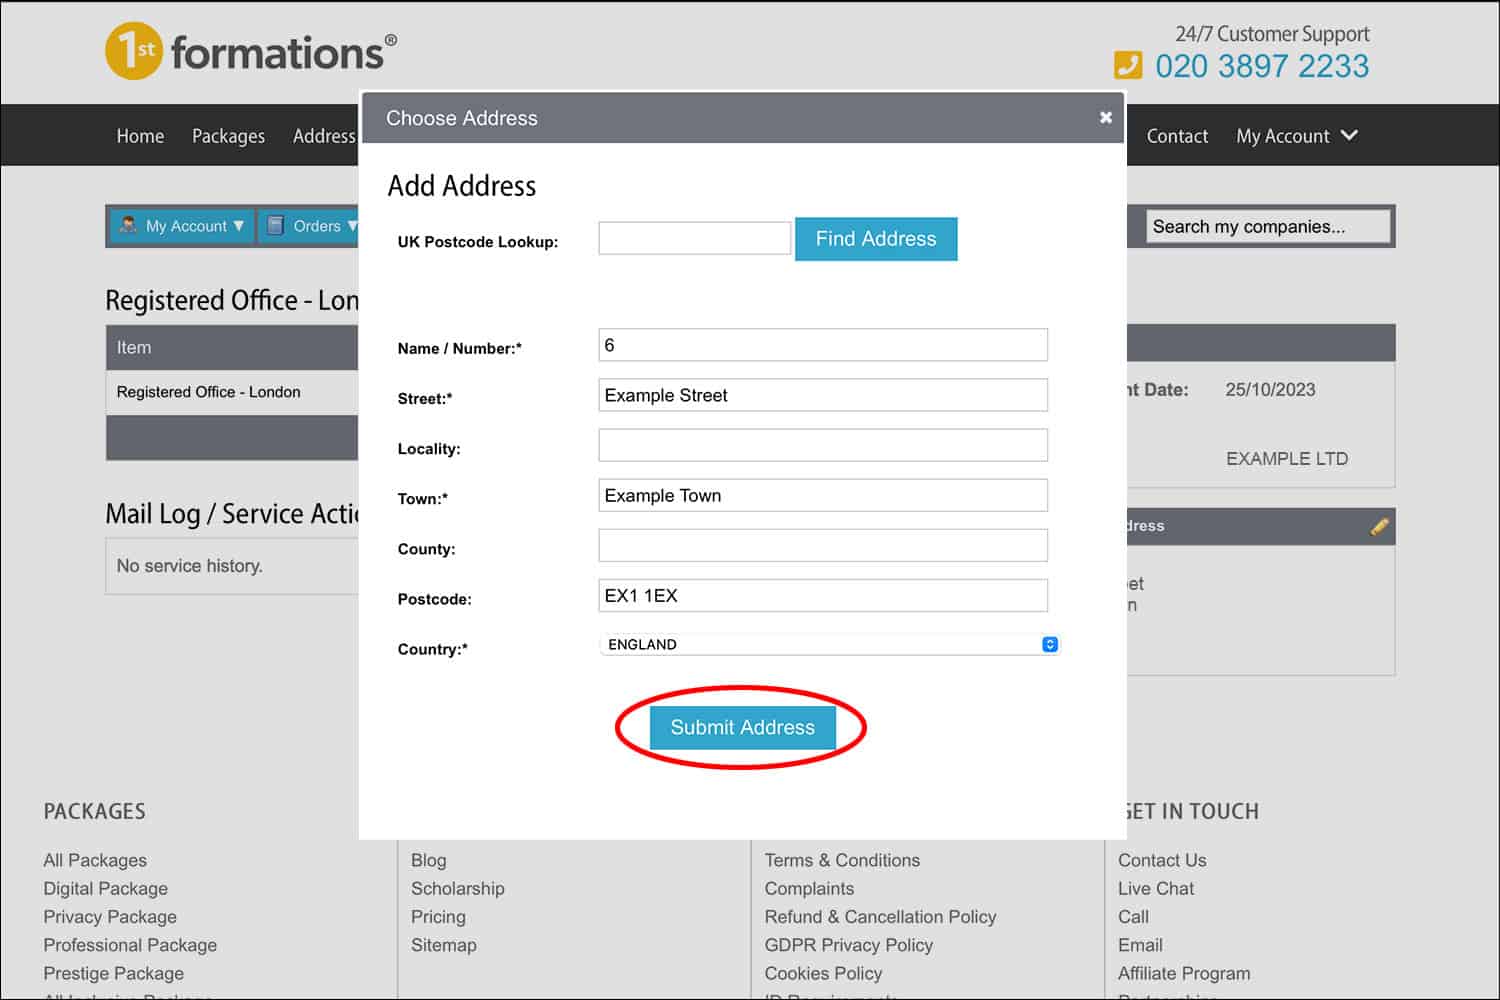 Screenshot of Rapid Formations' Add Address page with the 'Submit Address' button circled in red.